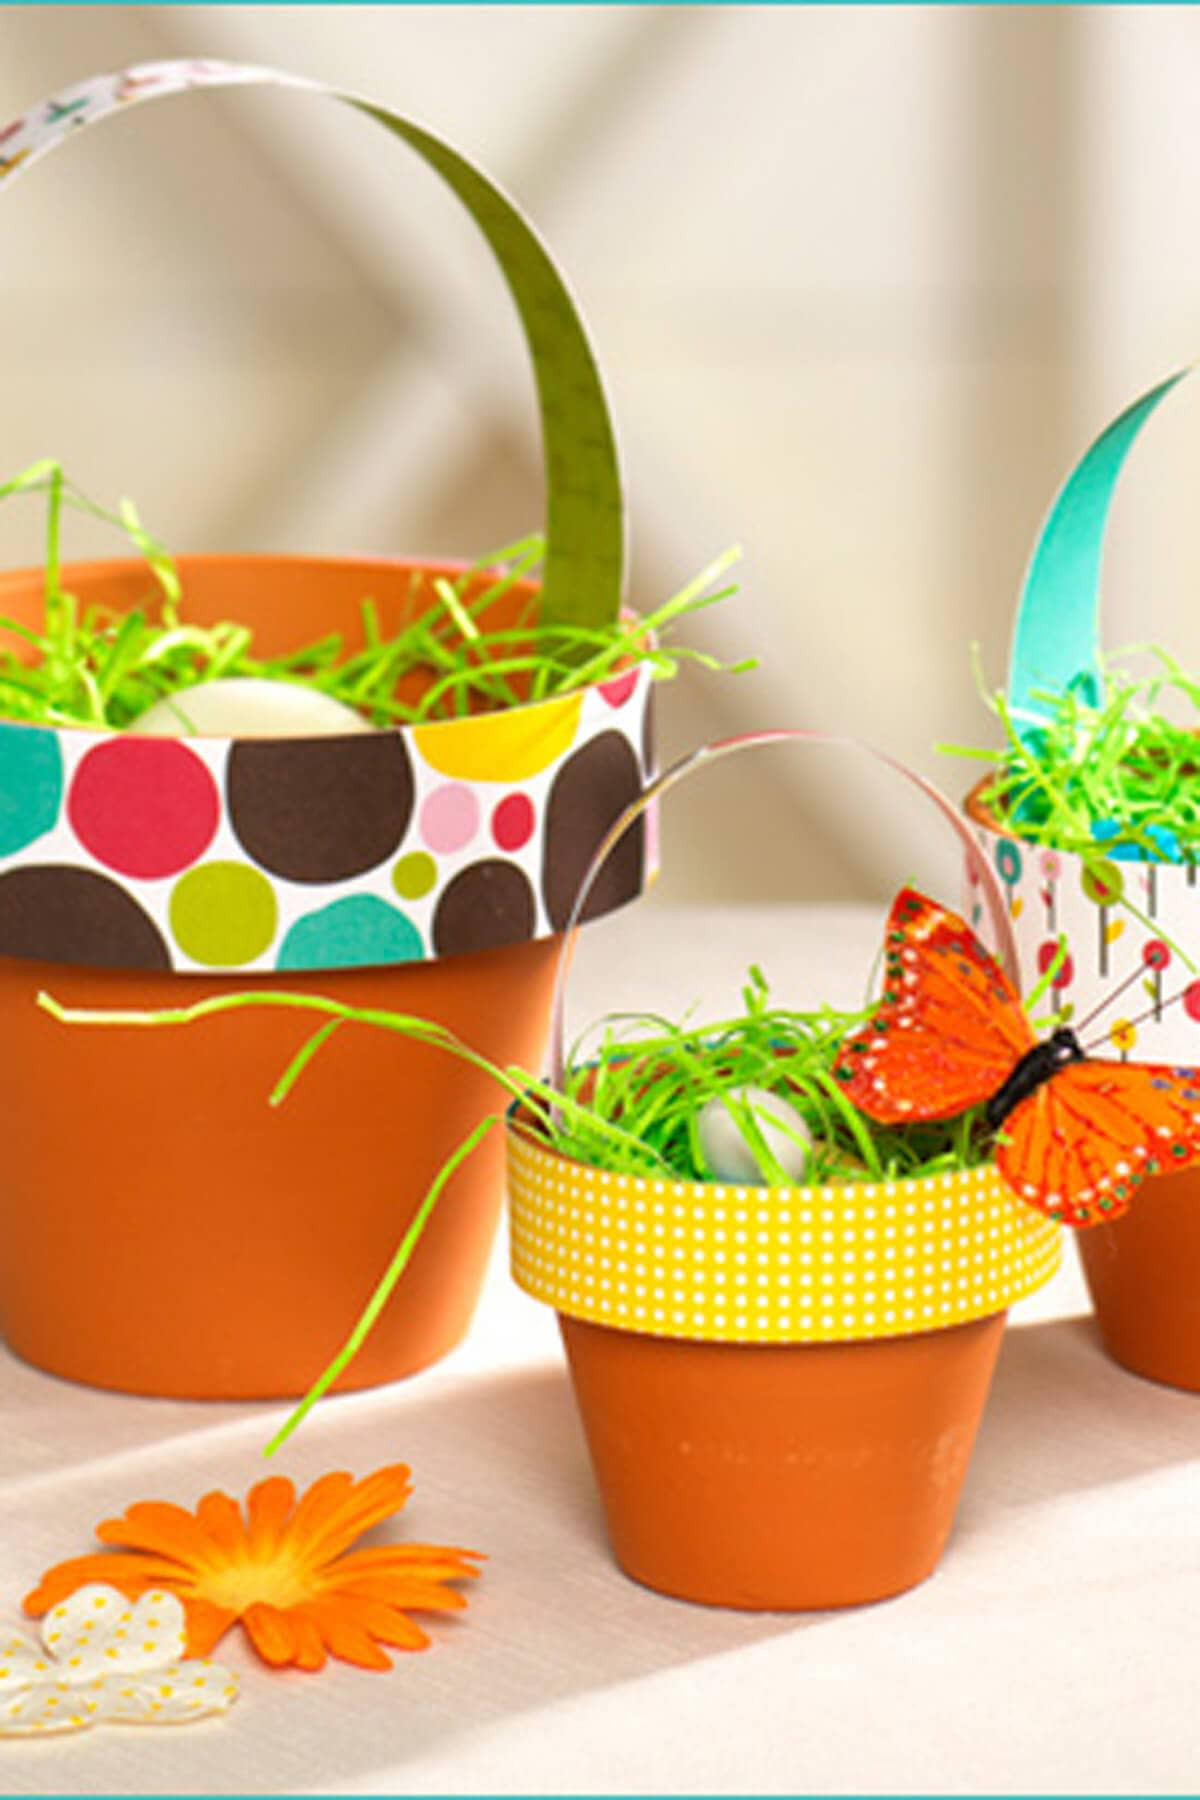 Easter Diy Projects
 25 Creative DIY Easter Basket Ideas that Can Be Done in